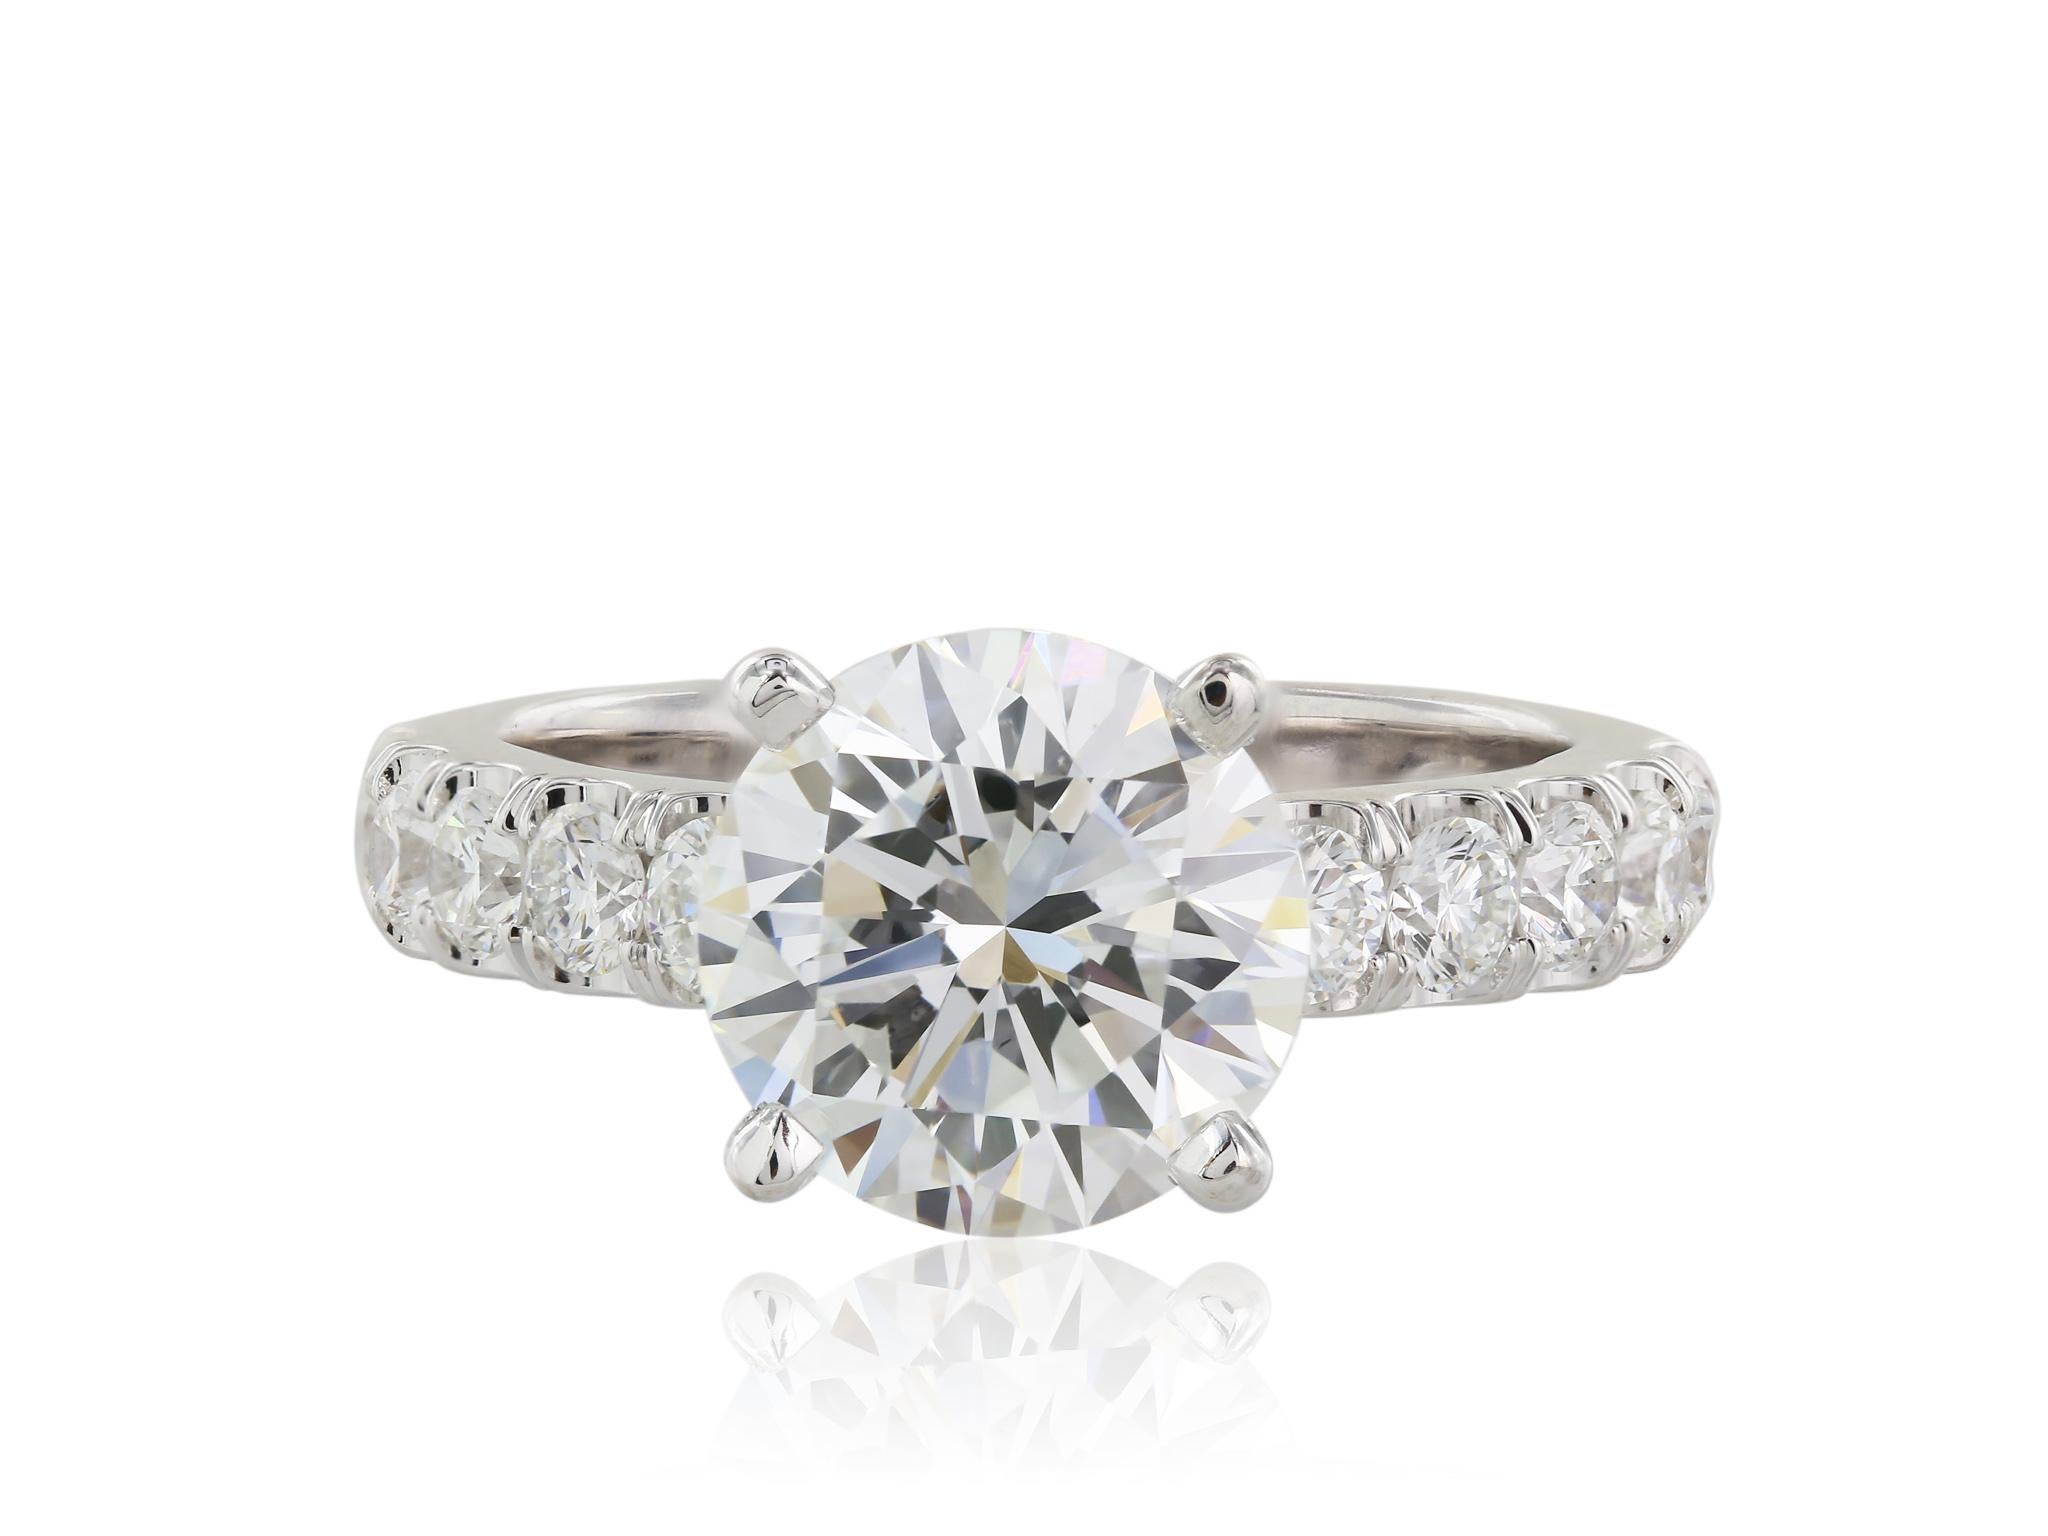 Contemporary 3.03 Carat GIA Certified Diamond Engagement Ring For Sale